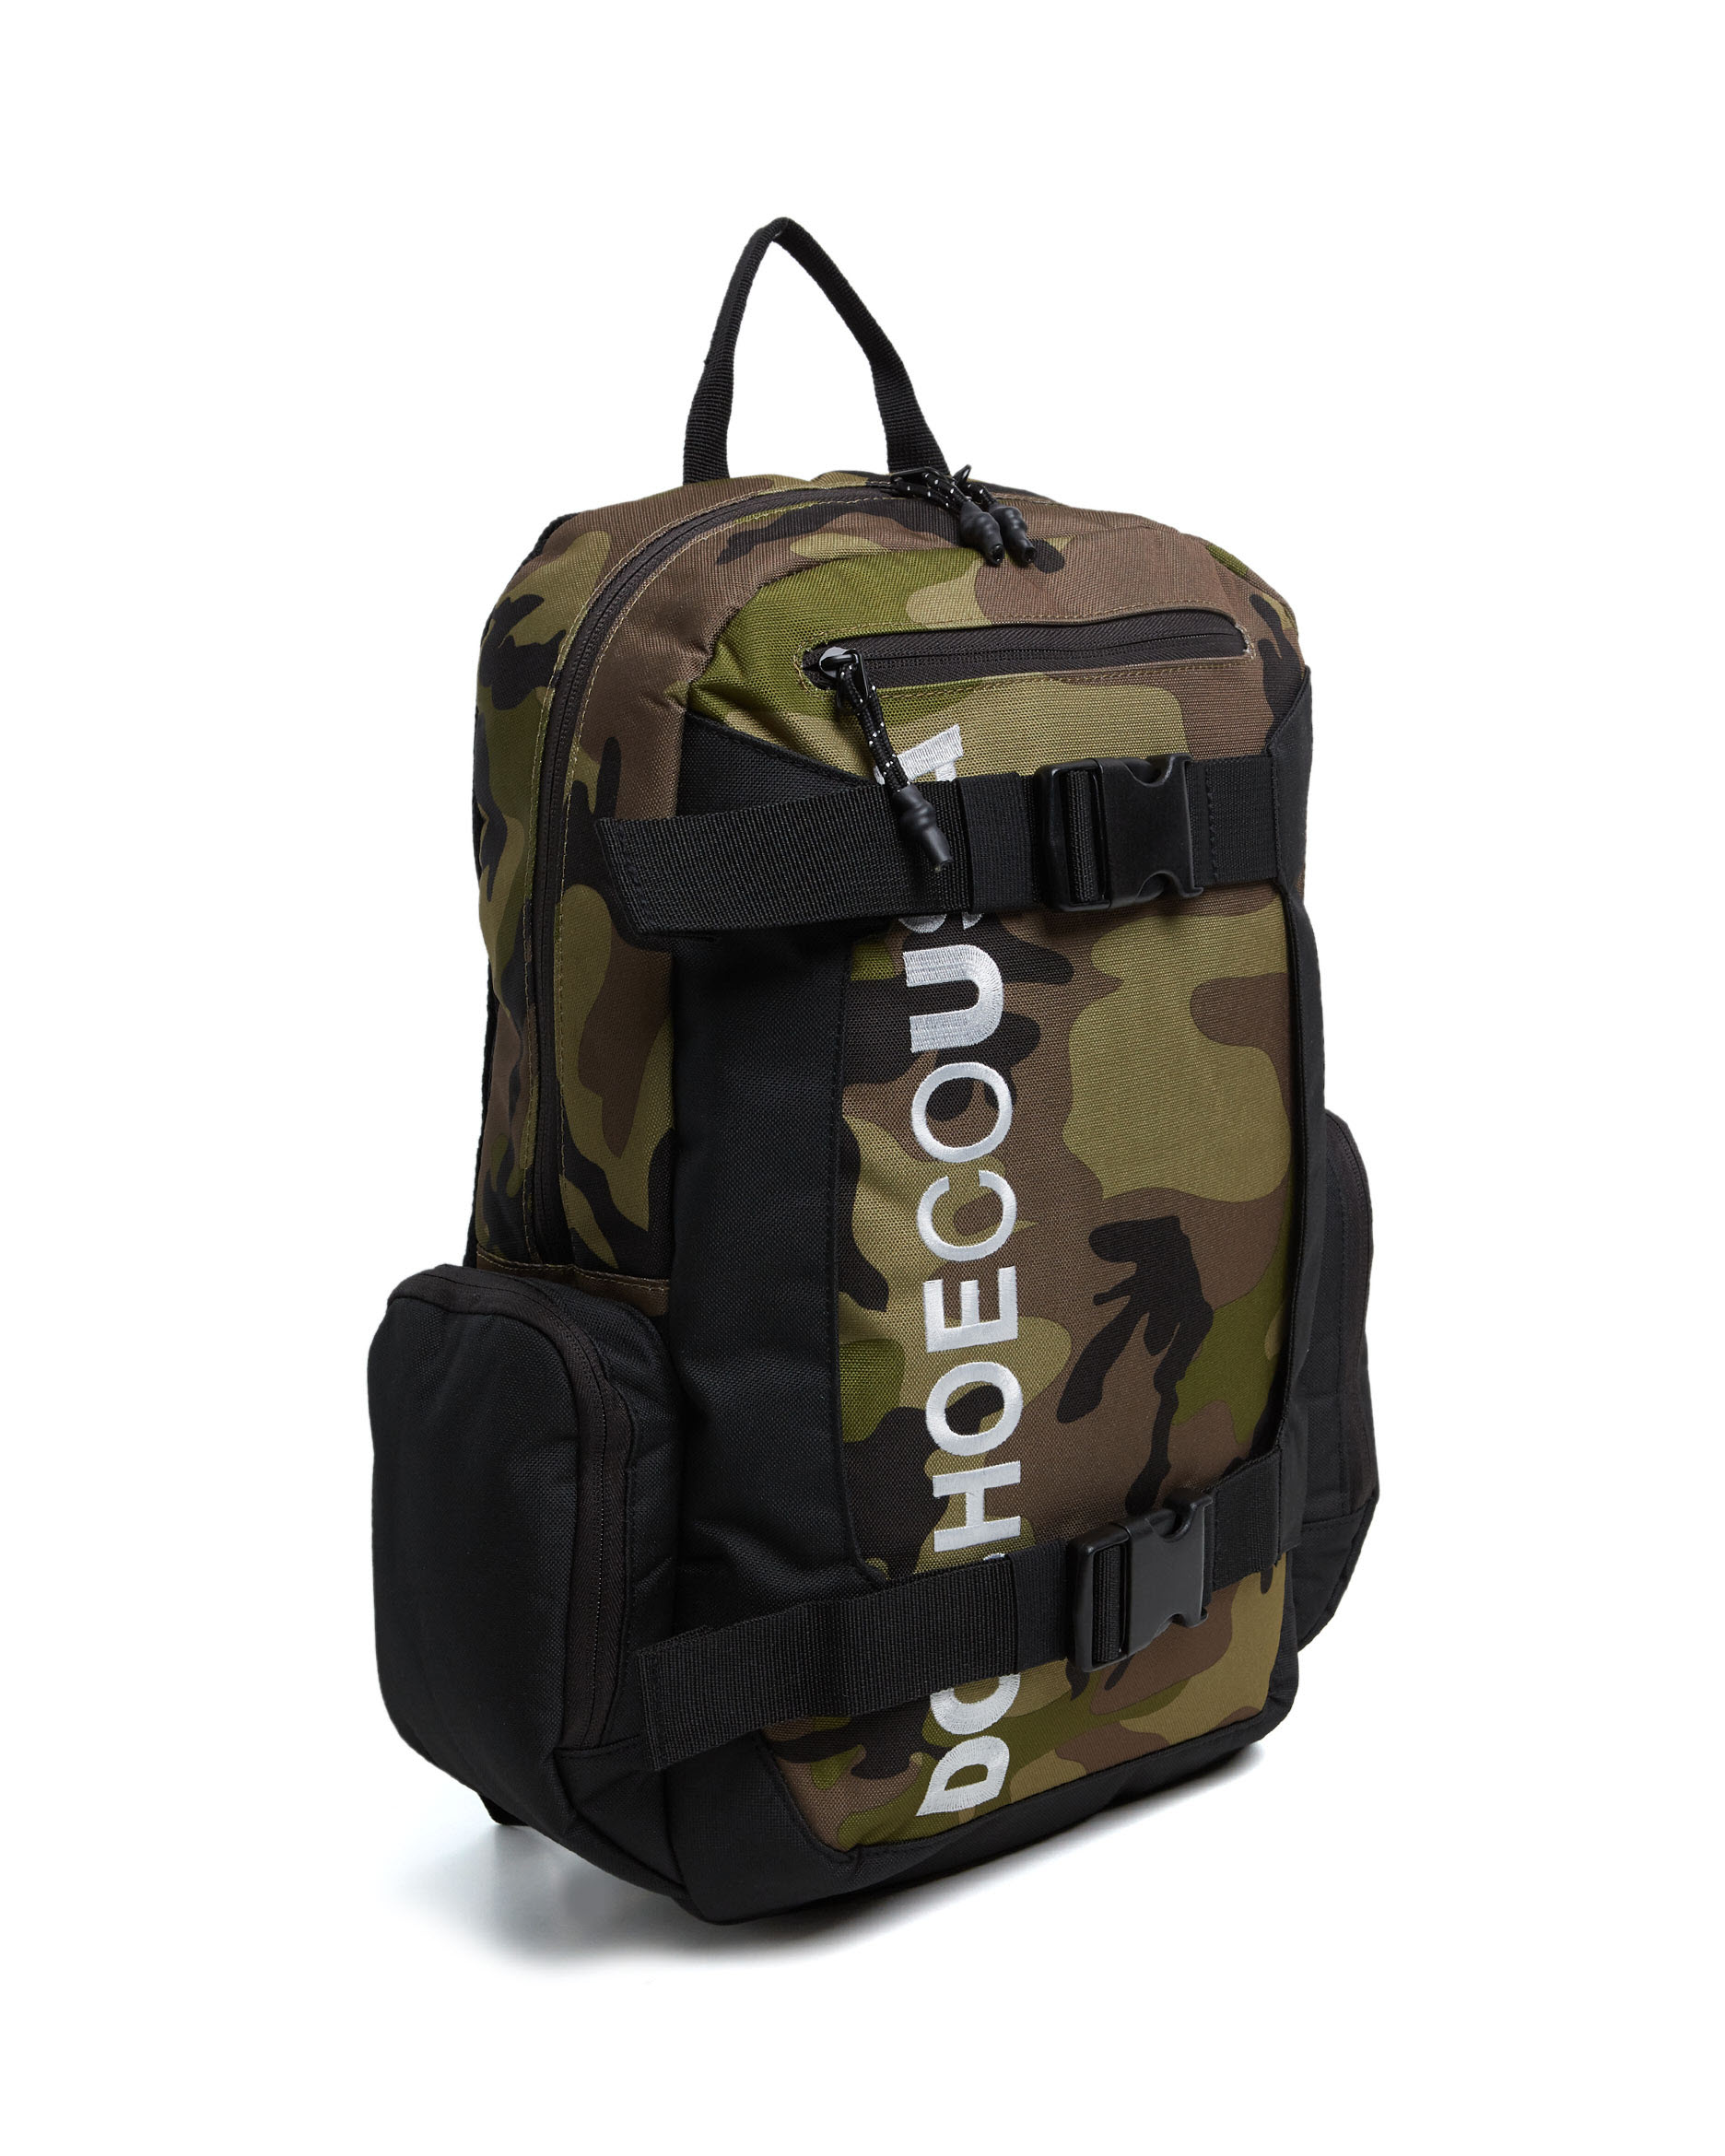 Dc Shoes Mens Chalkers Backpack - Camo | SurfStitch